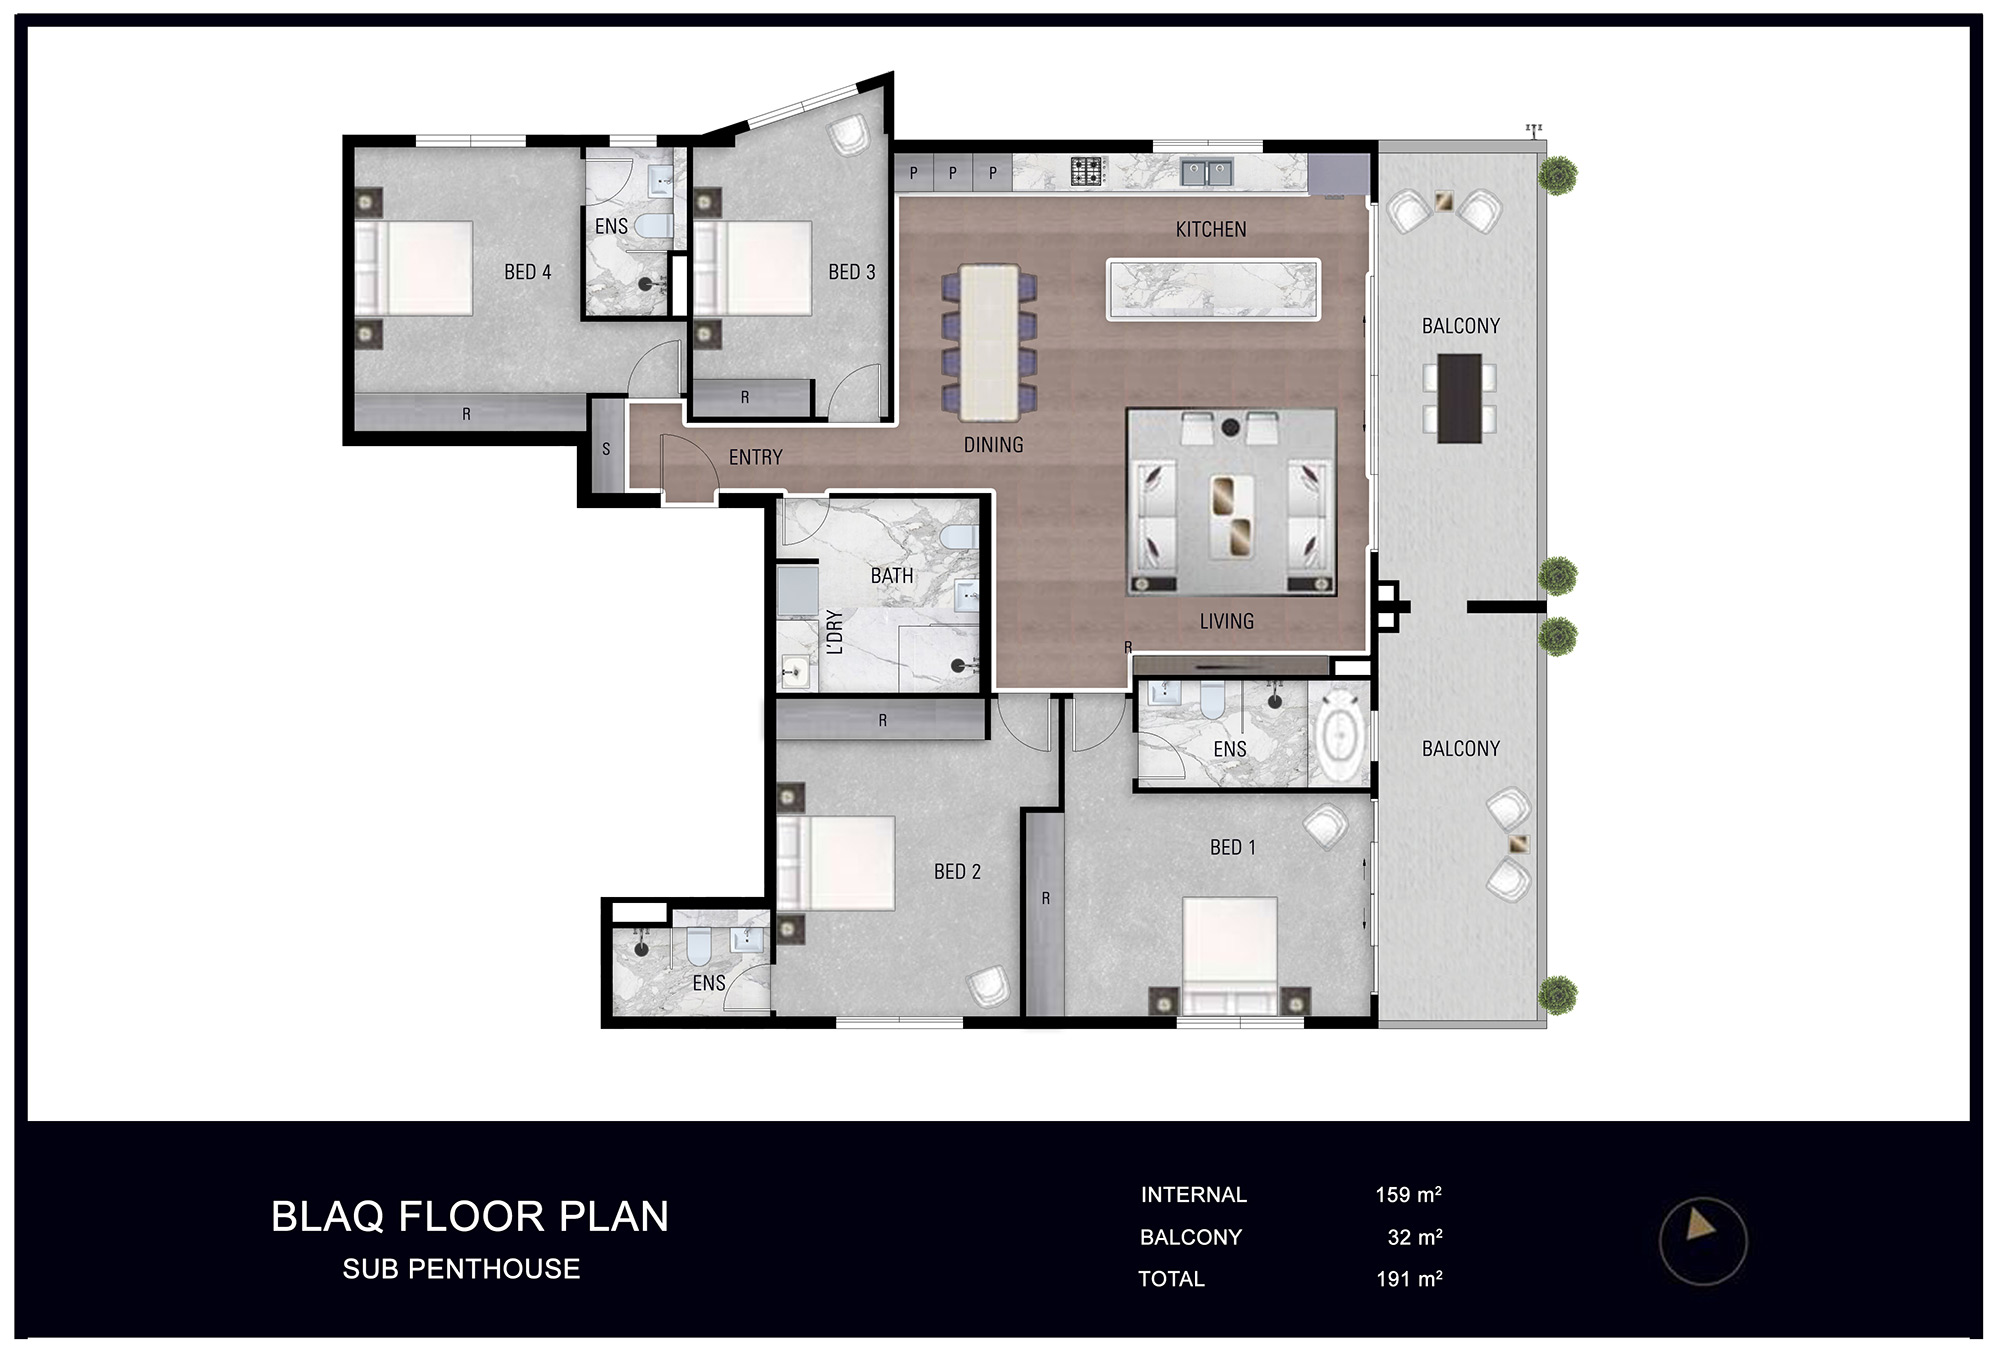 S16944 Blaq Floor Plans Sub penthouse editted